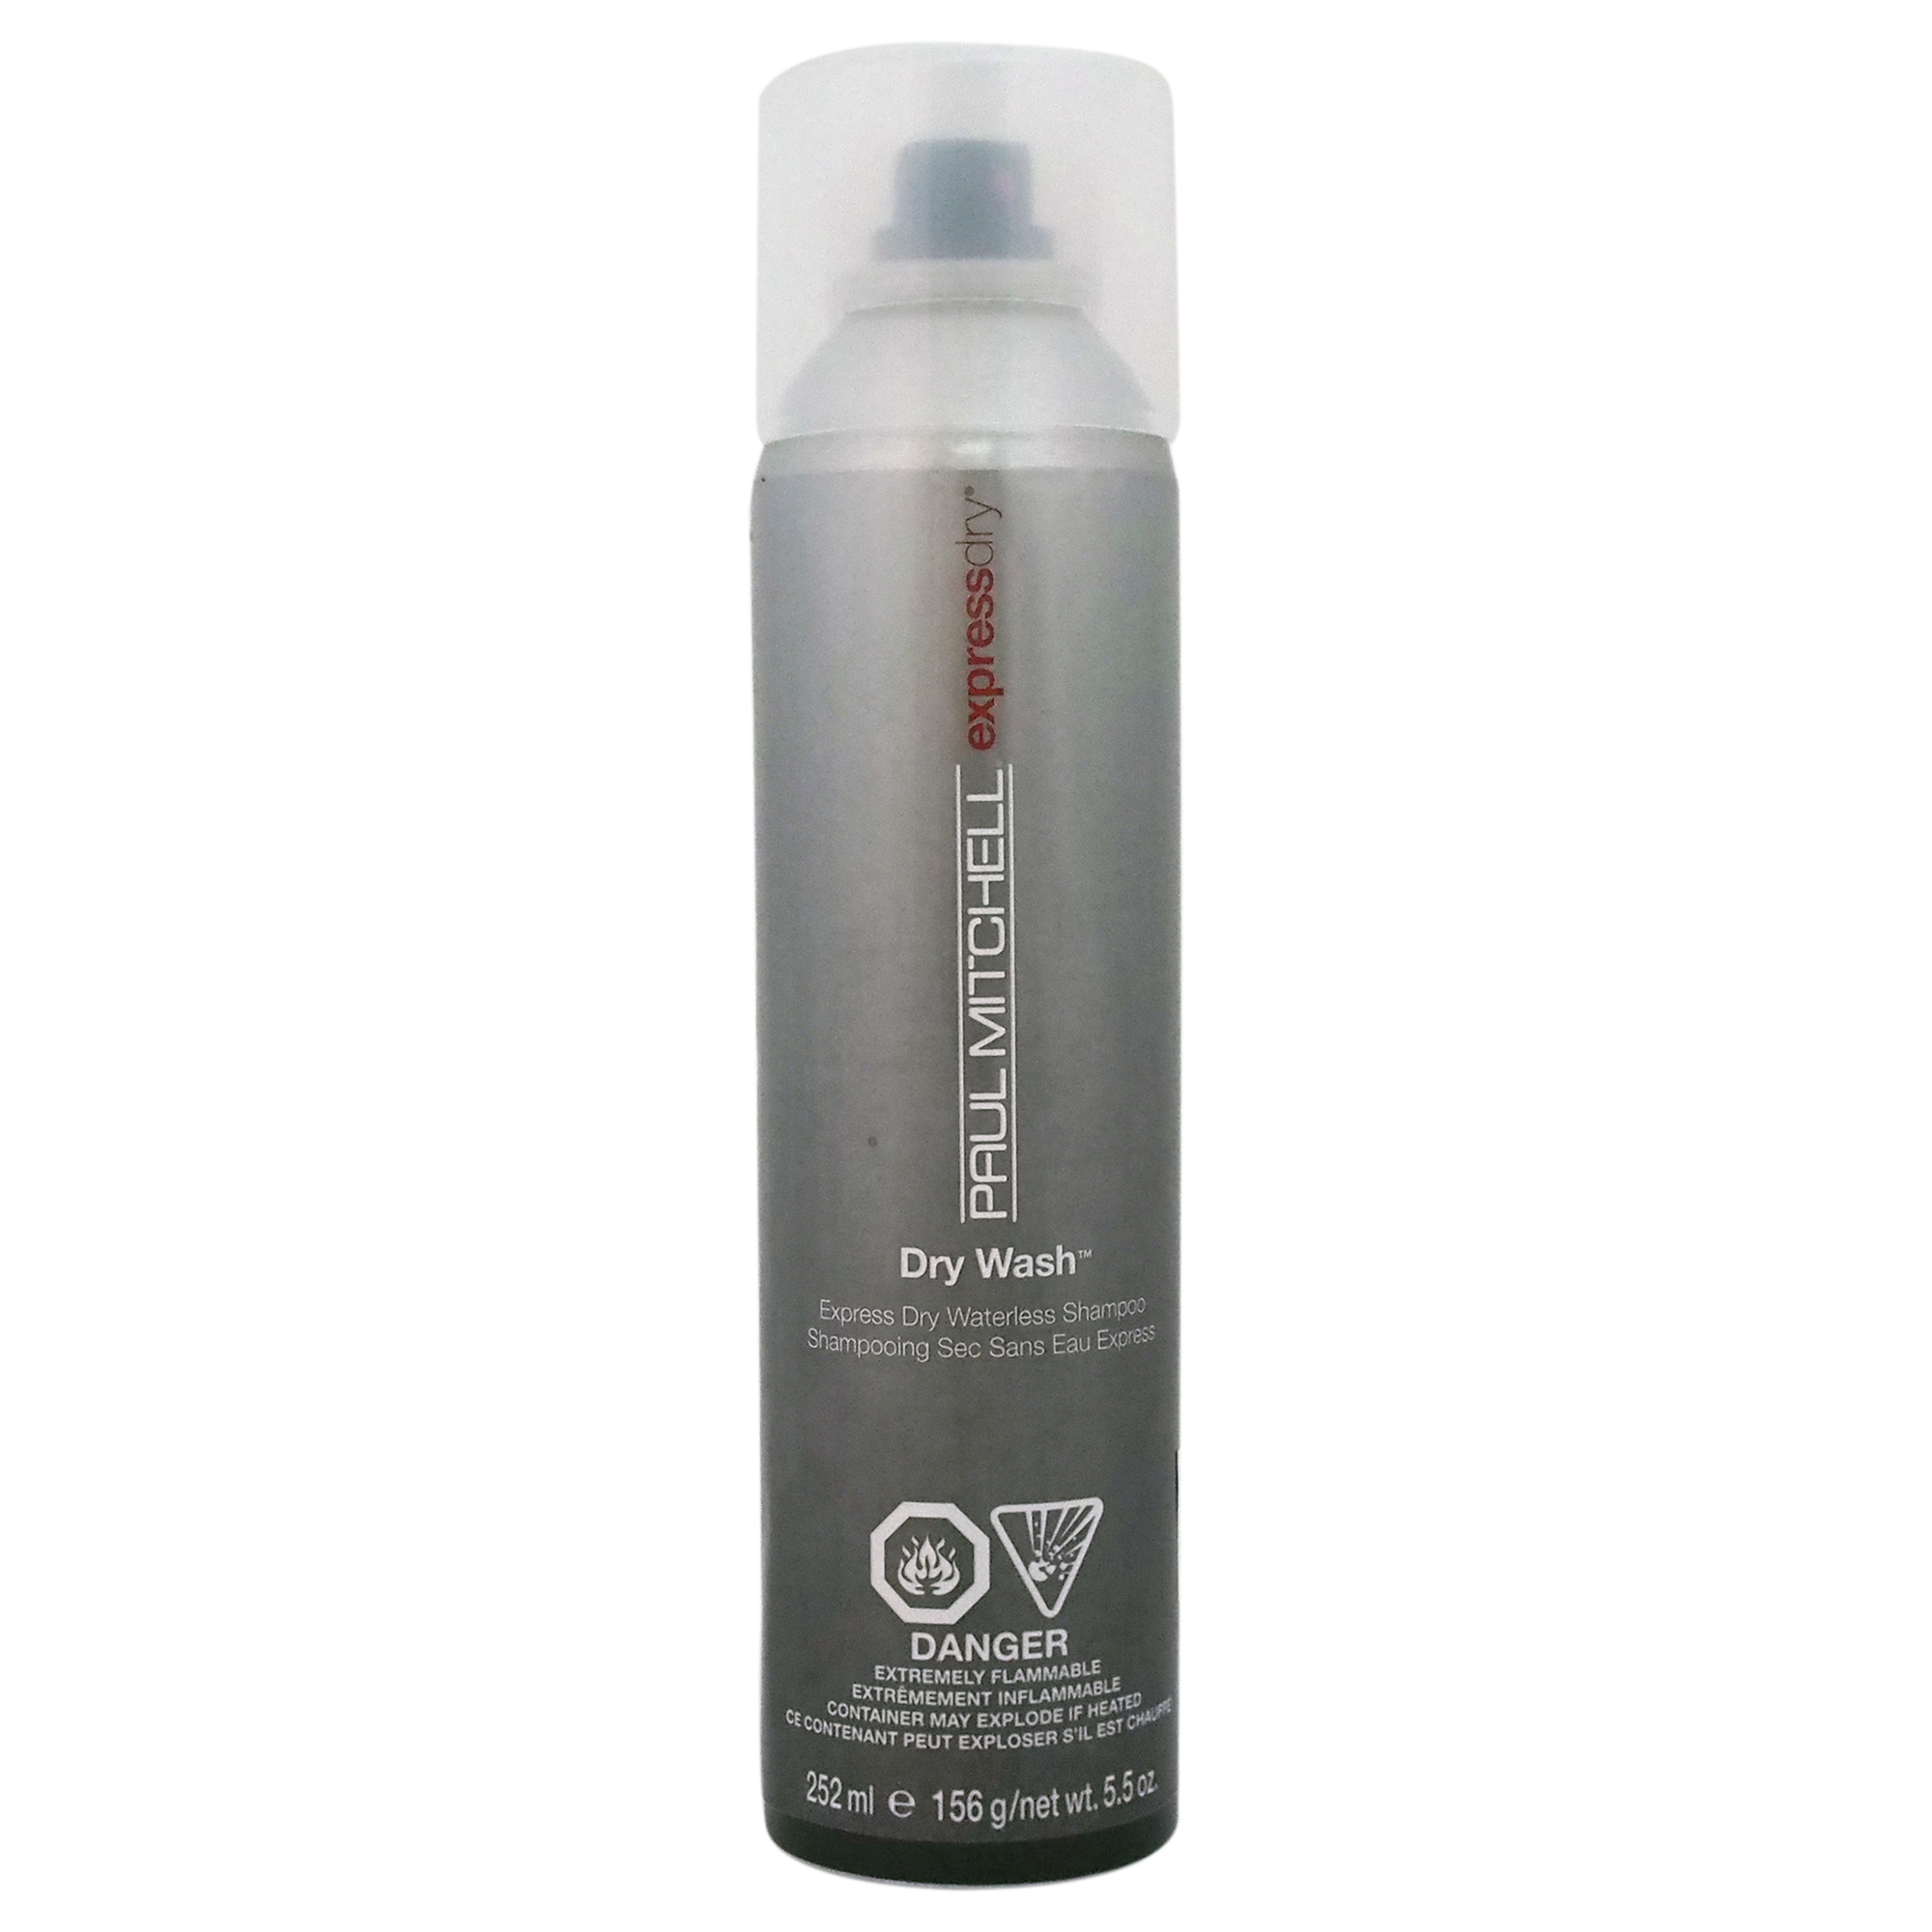 Paul Mitchell Dry Wash Express Dry Waterless Shampoo by Paul Mitchell for Unisex - 5.5 oz Shampoo